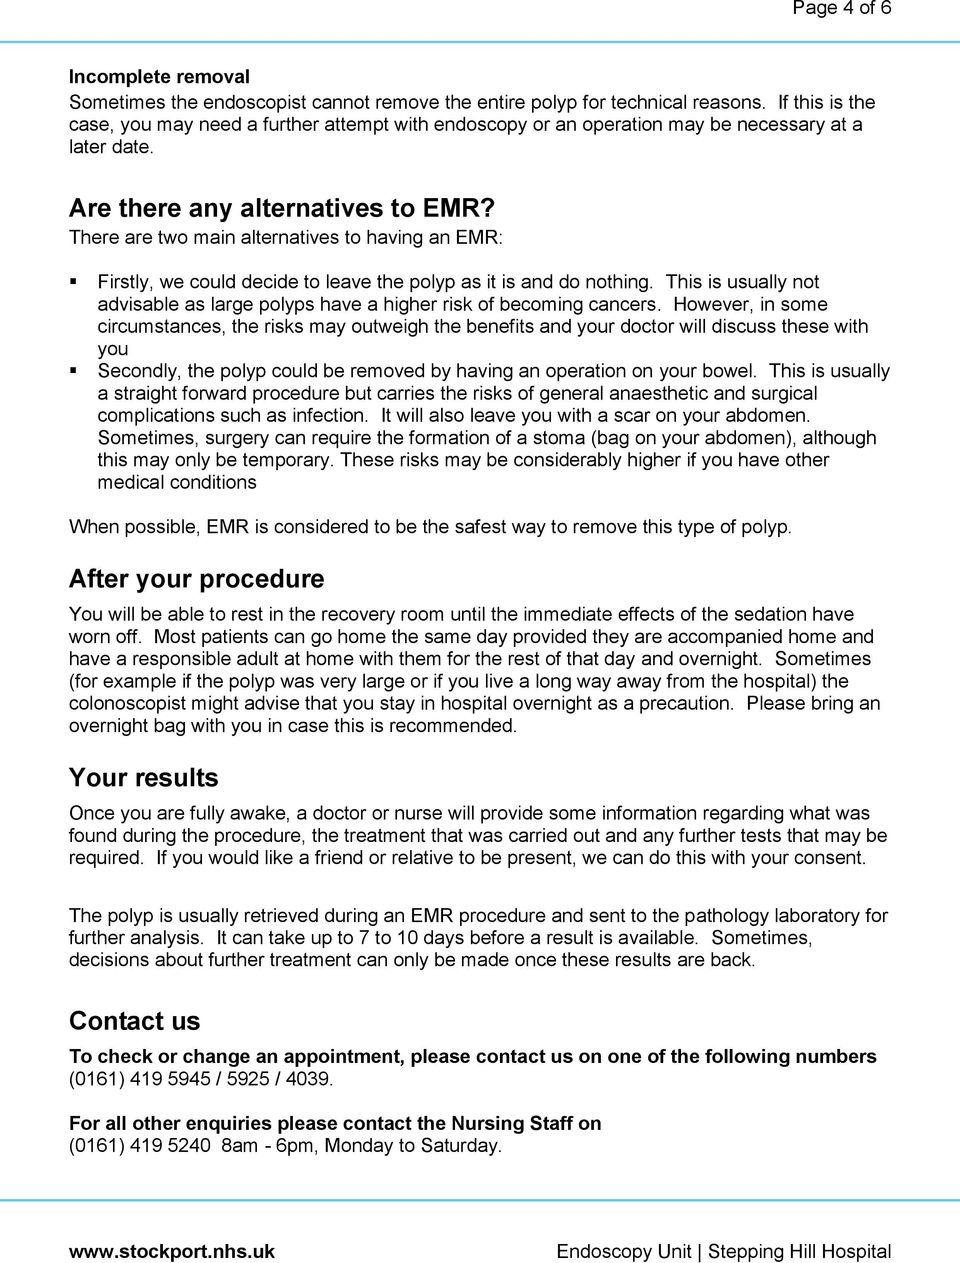 There are two main alternatives to having an EMR: Firstly, we could decide to leave the polyp as it is and do nothing.